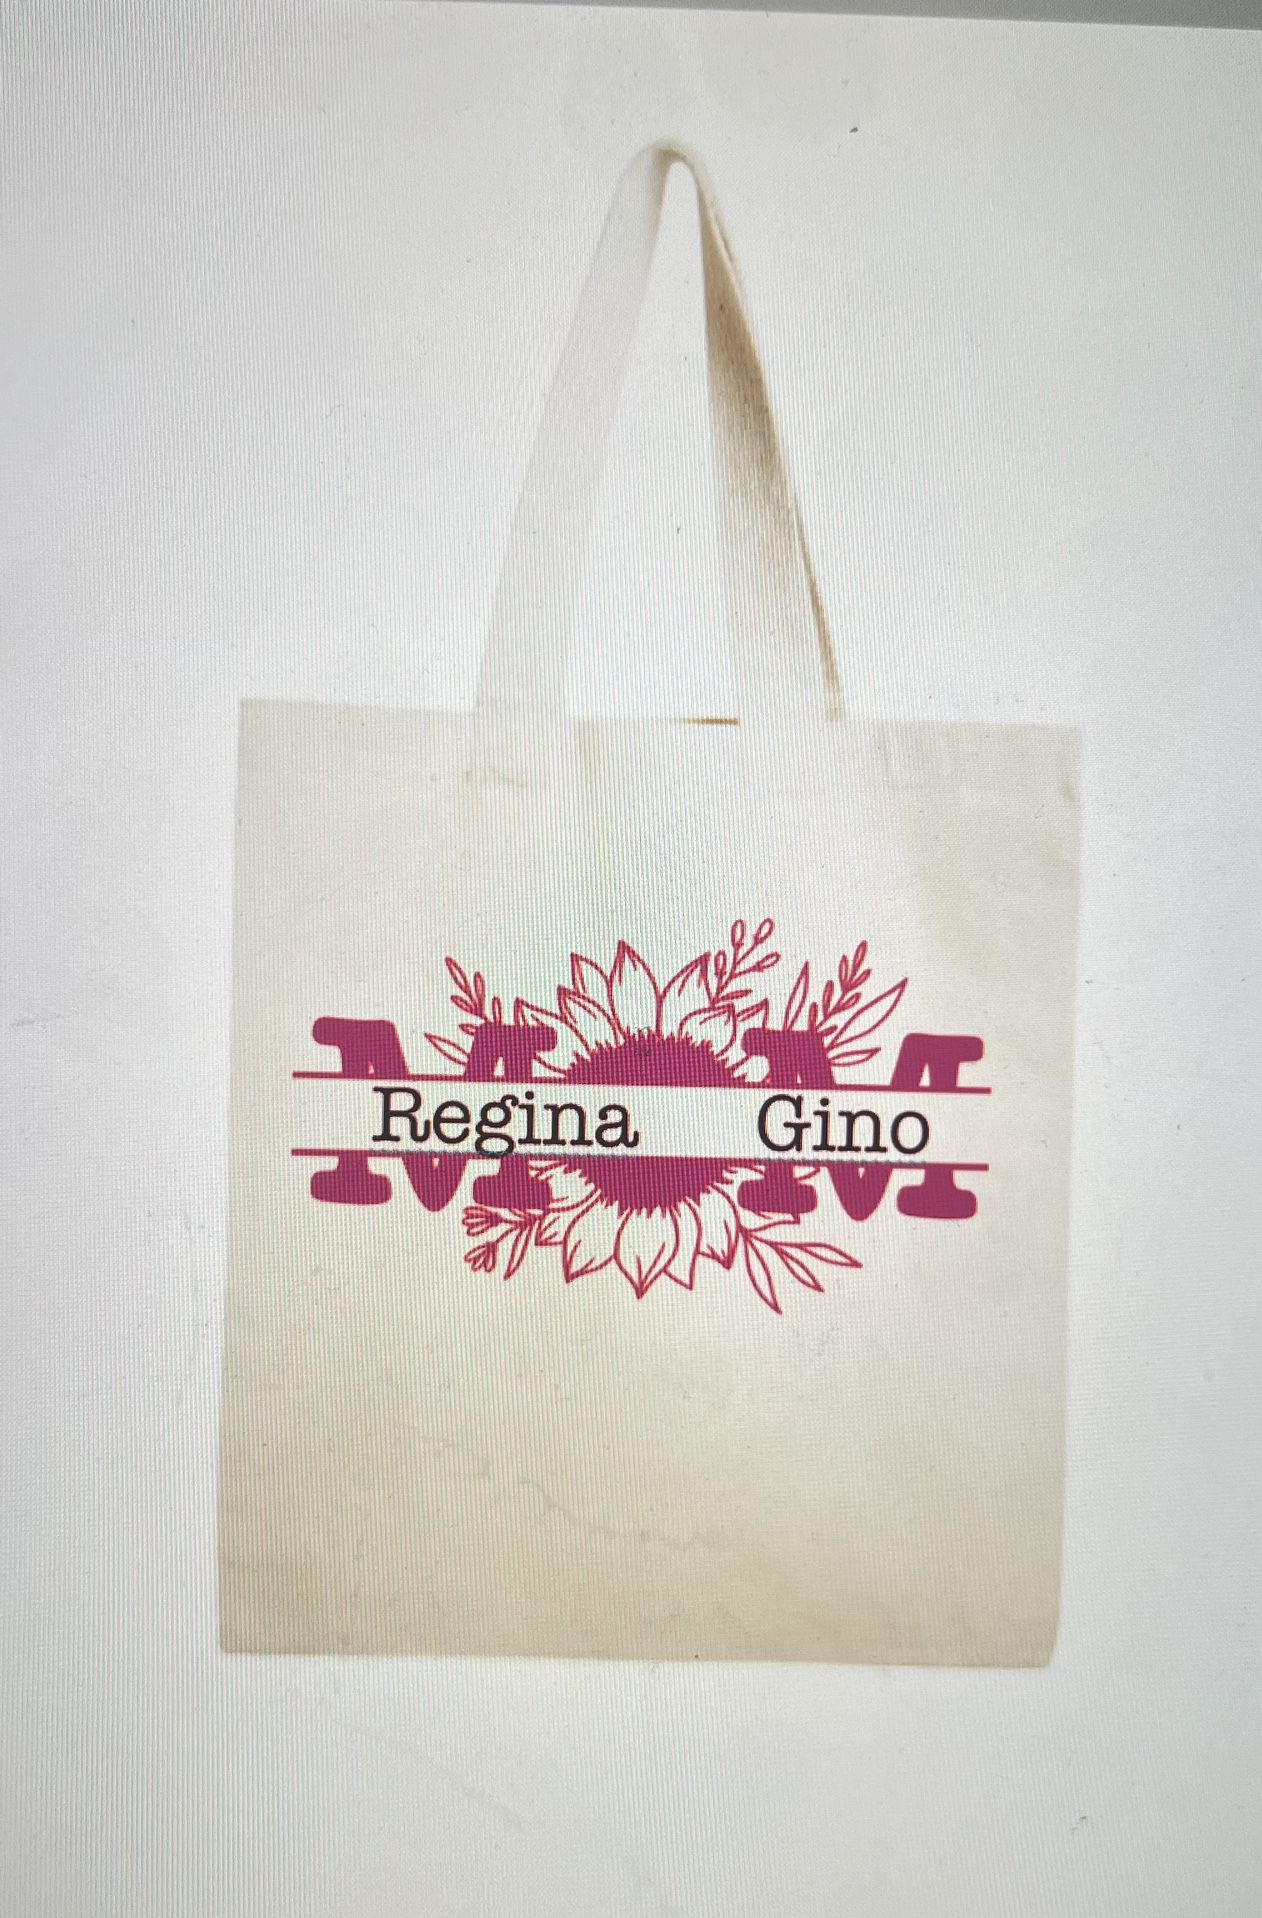 Tote Bags For Mother’s Day 